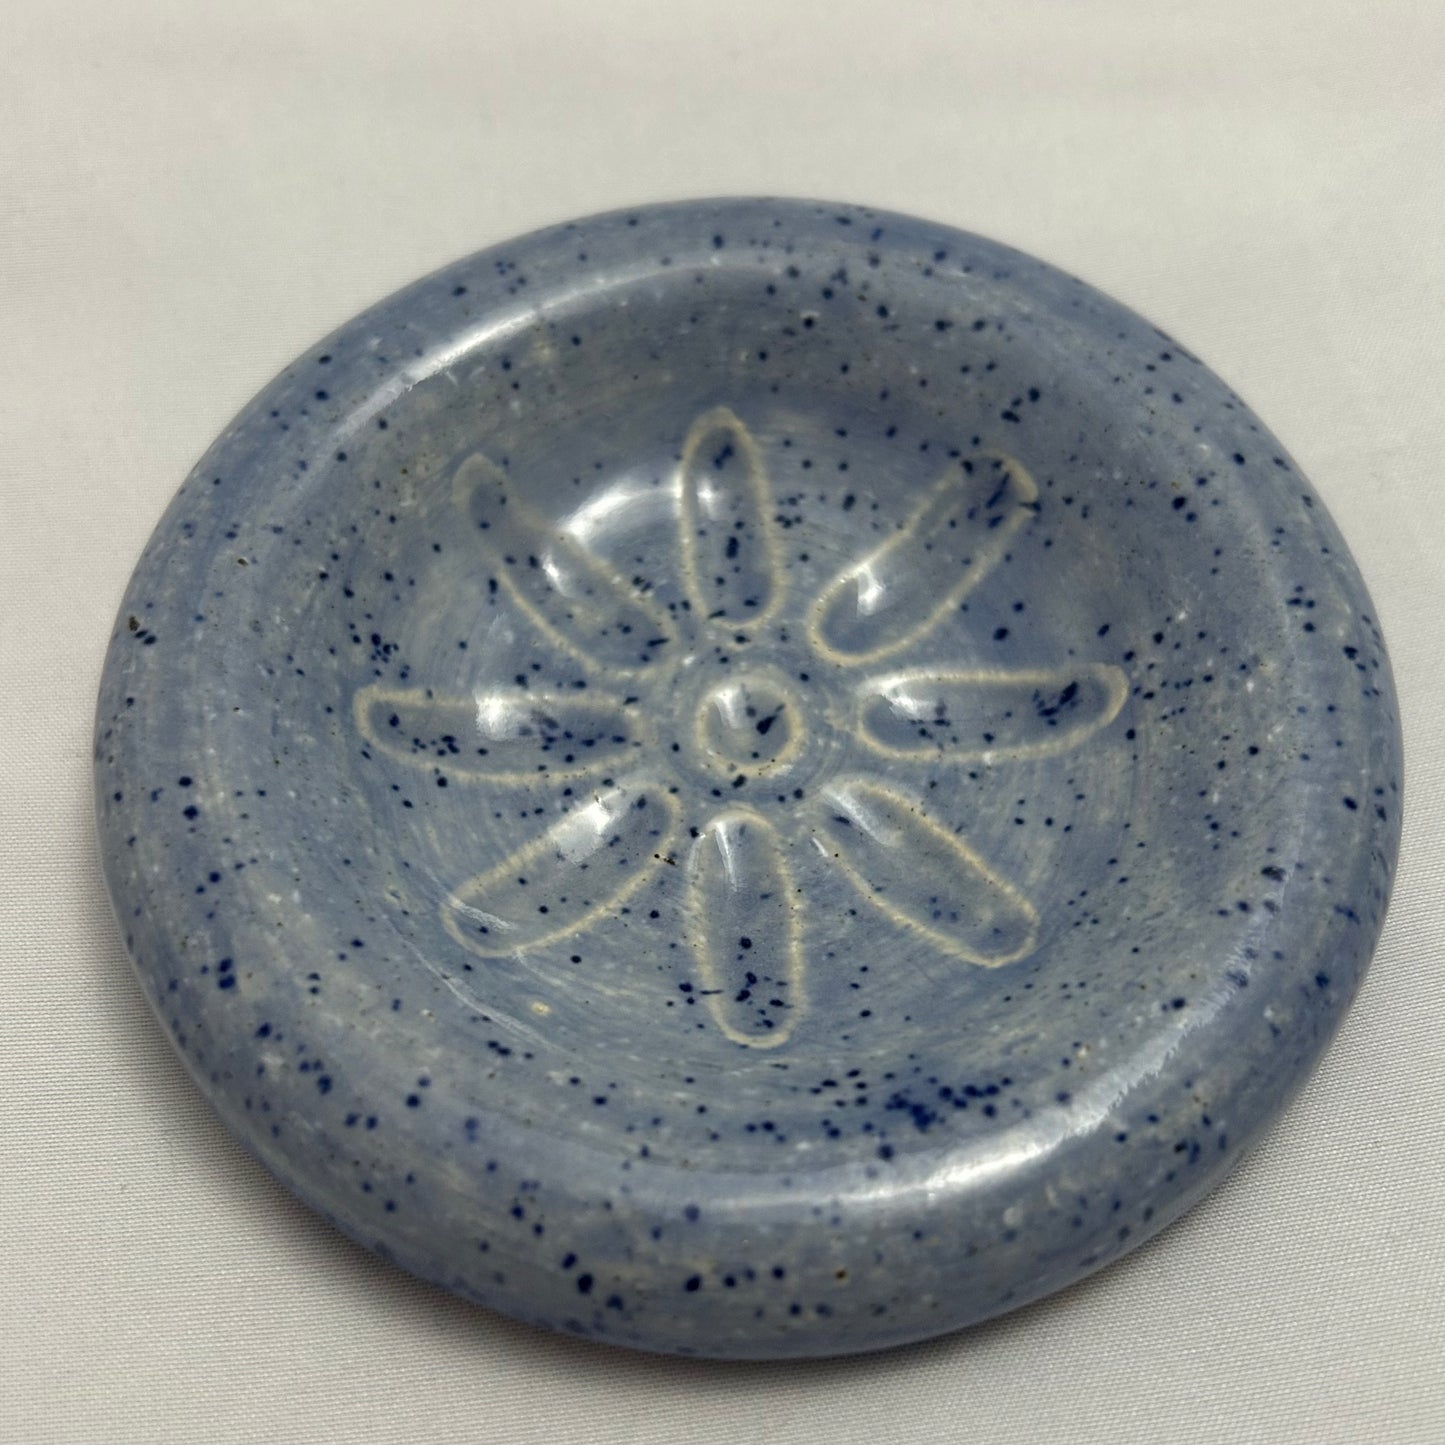 blue spotted flower dish / ash tray